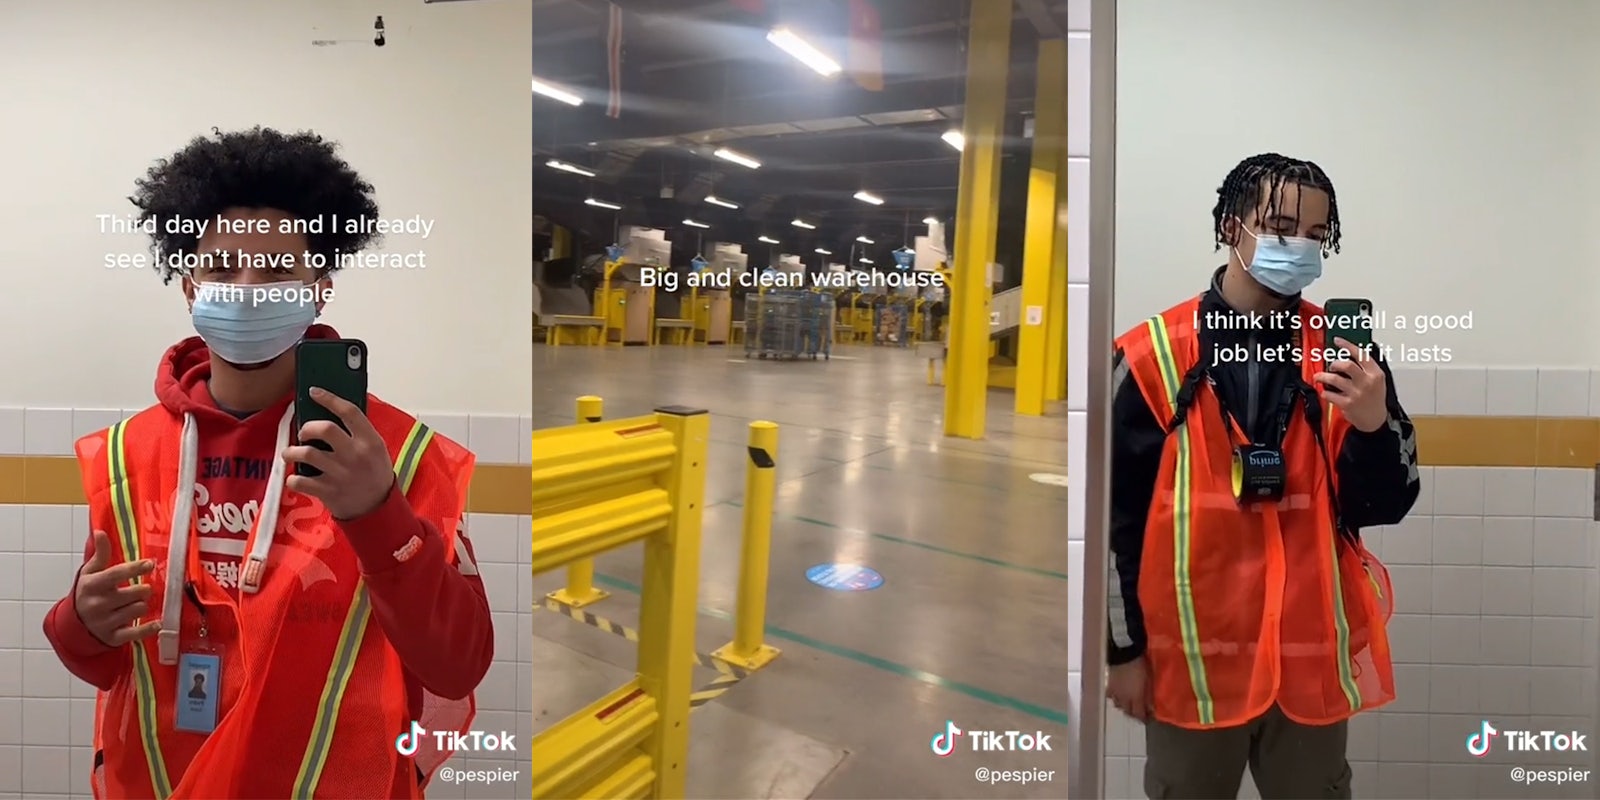 young man in orange work vest holding up phone with caption 'third day here and I already see I don't have to interact with people' (l) warehouse with caption 'big and clean warehouse' (c) same young man with caption 'I think it's overall a good job let's see if it lasts' (r)